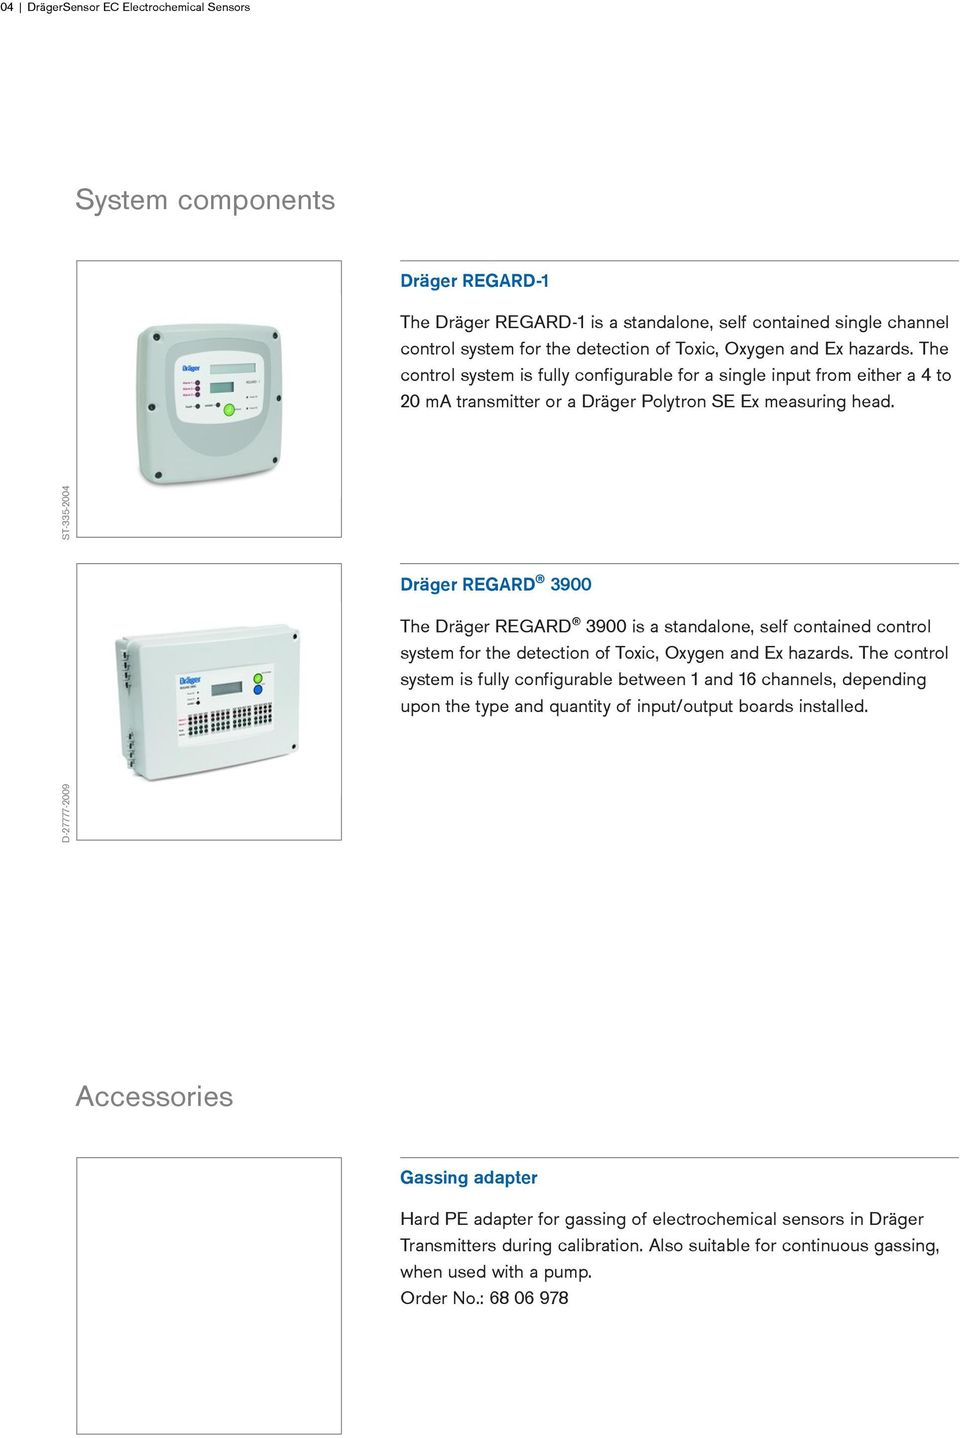 D-27777-2009 ST-335-2004 Dräger REGARD 3900 The Dräger REGARD 3900 is a standalone, self contained control system for the detection of Toxic, Oxygen and Ex hazards.